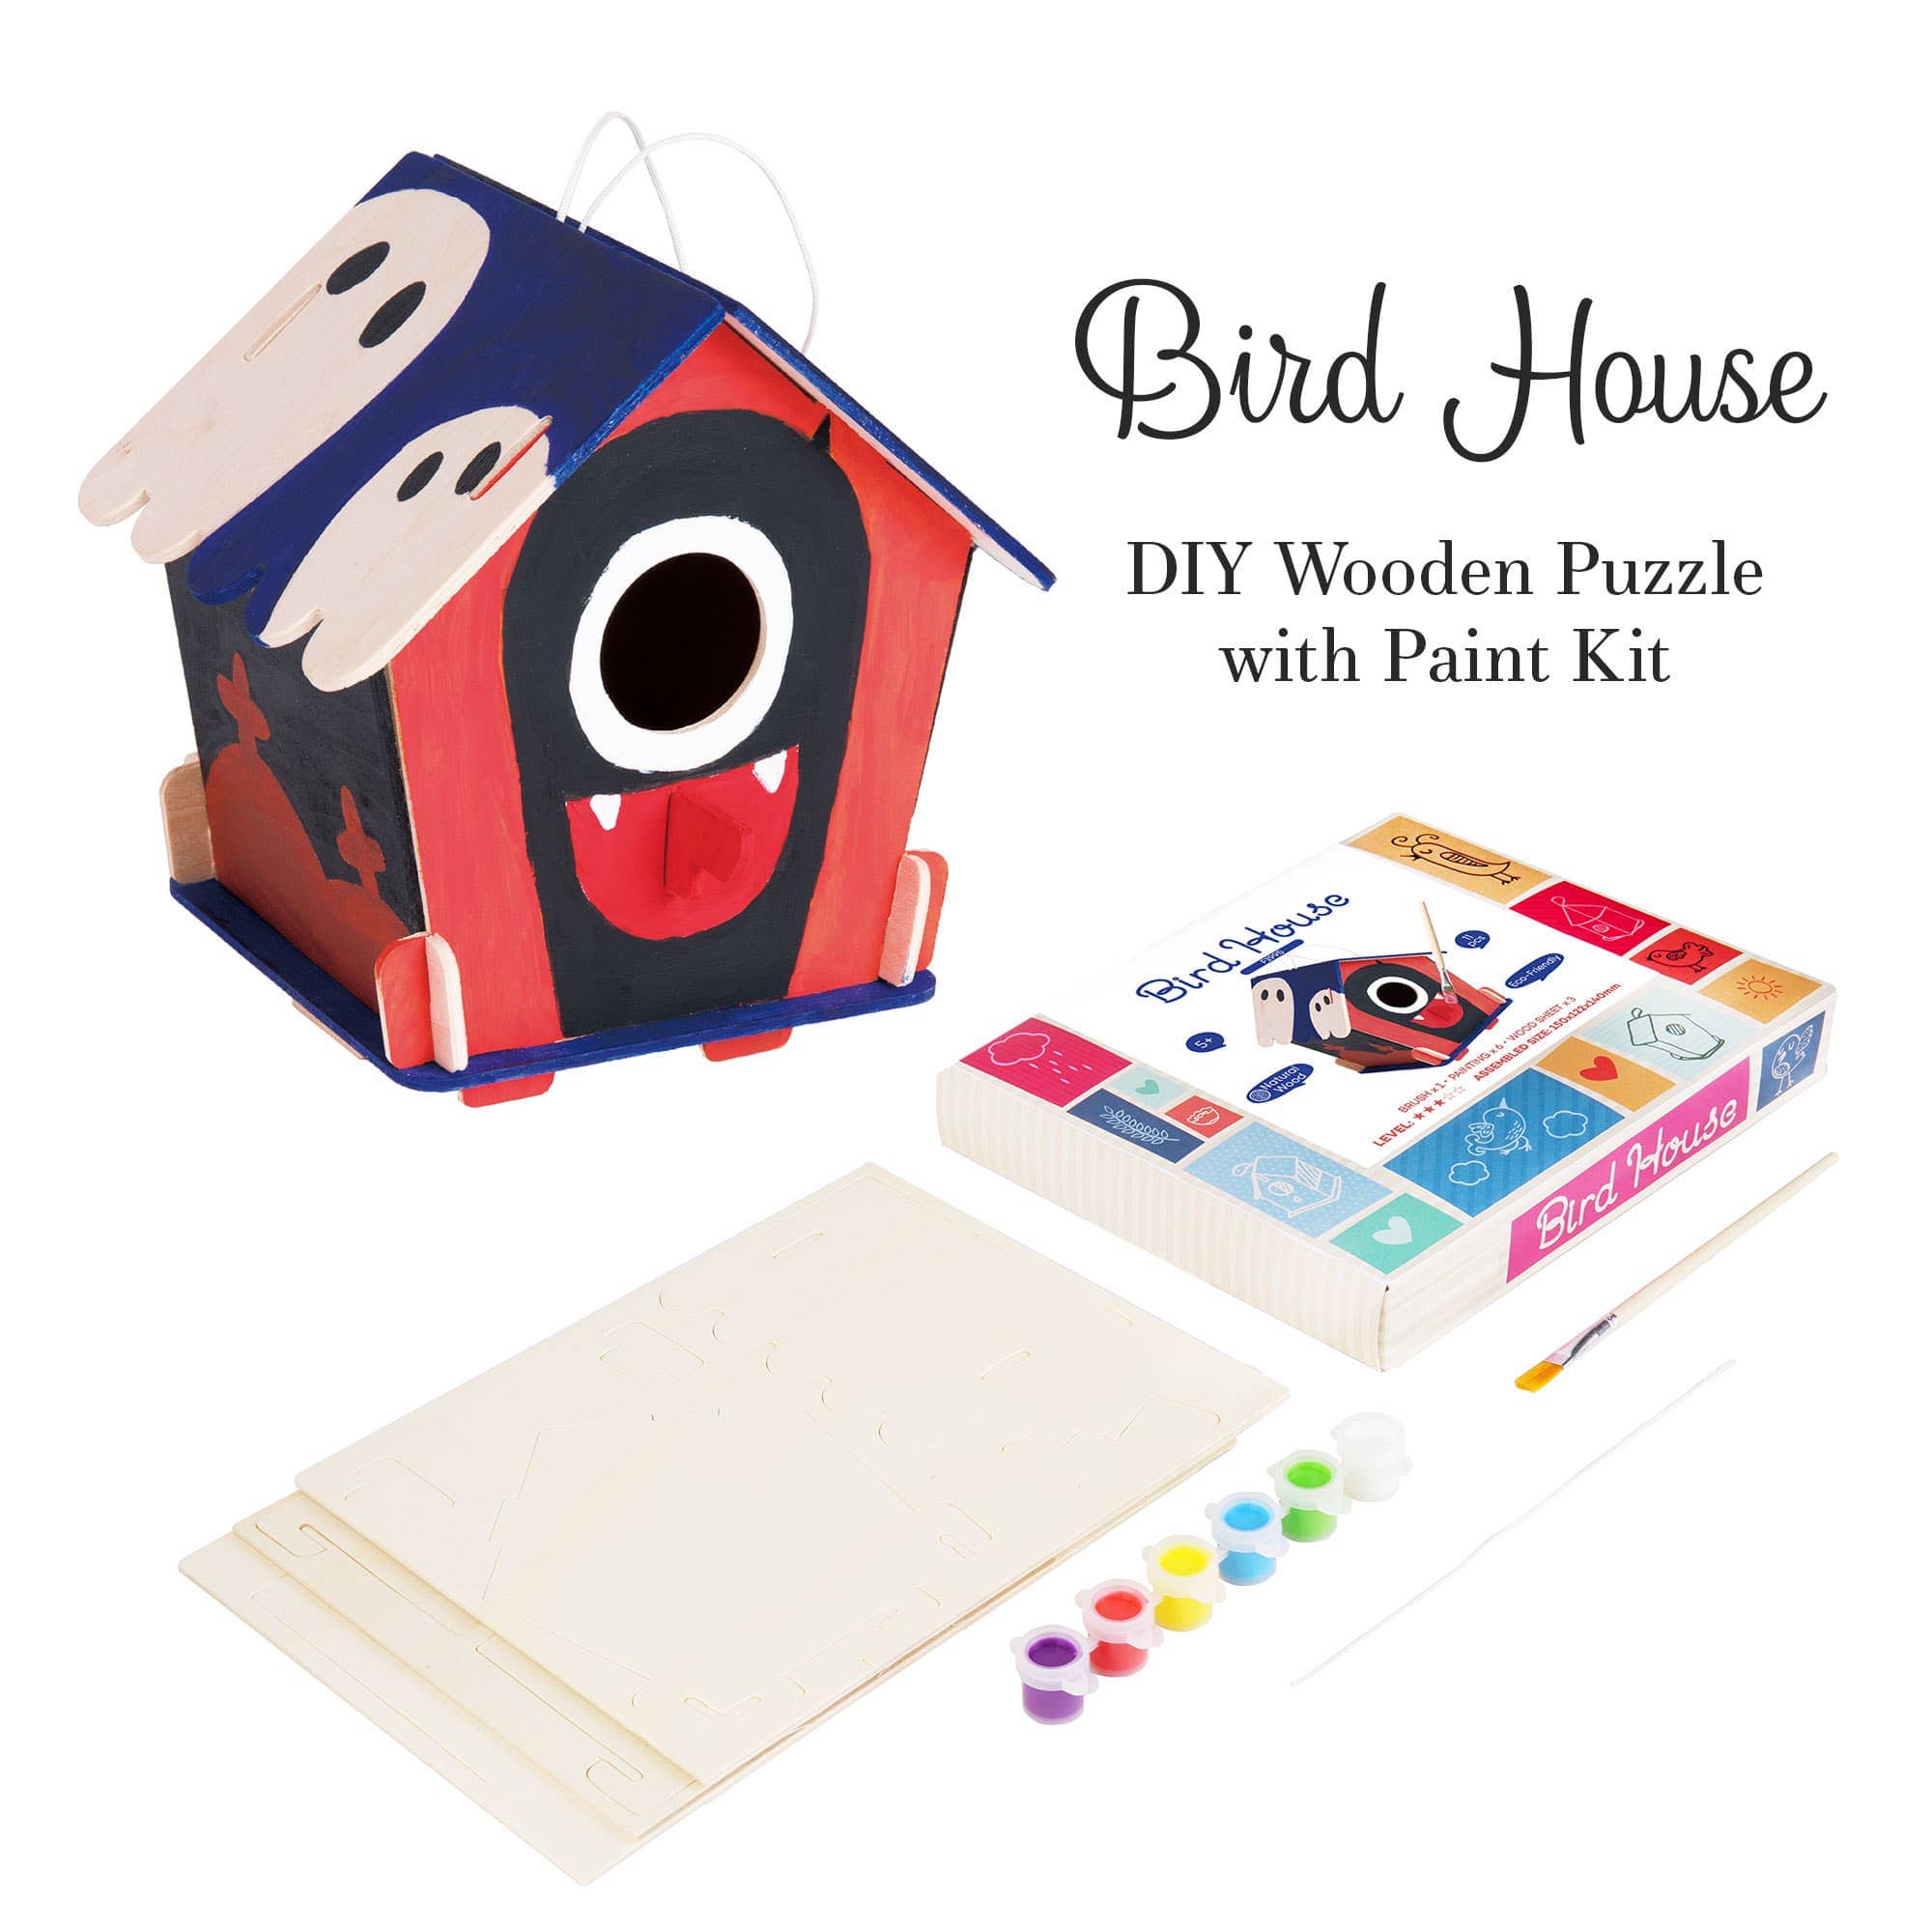 Hands Craft FY199, DIY 3D Wooden Birdhouse with Paint Kit Kawaii Gifts 819887027402